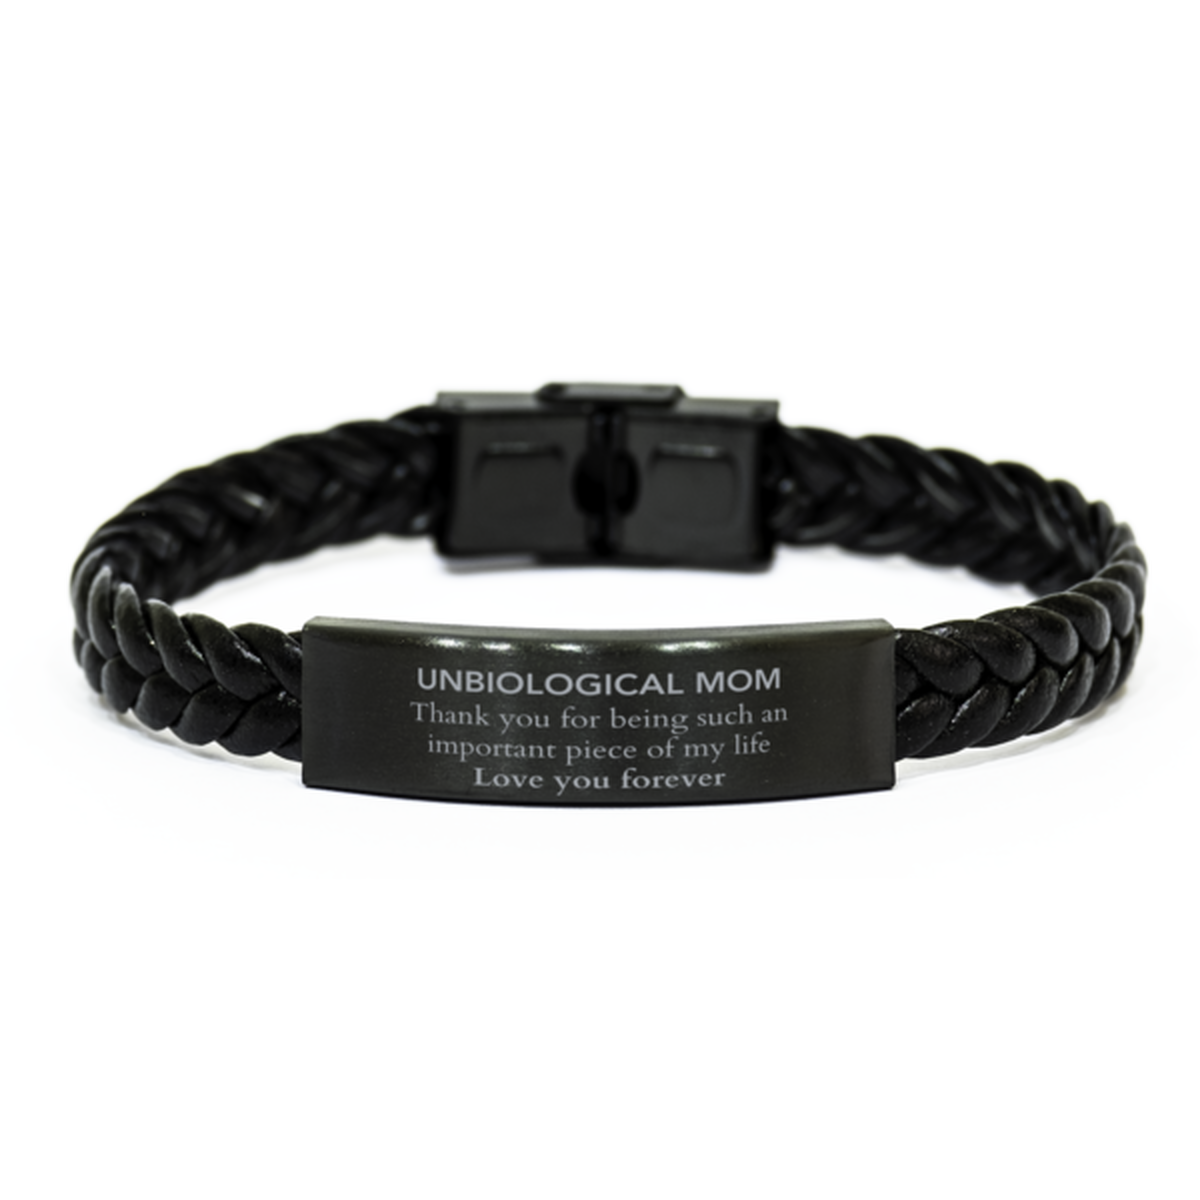 Appropriate Unbiological Mom Braided Leather Bracelet Epic Birthday Gifts for Unbiological Mom Thank you for being such an important piece of my life Unbiological Mom Christmas Mothers Fathers Day